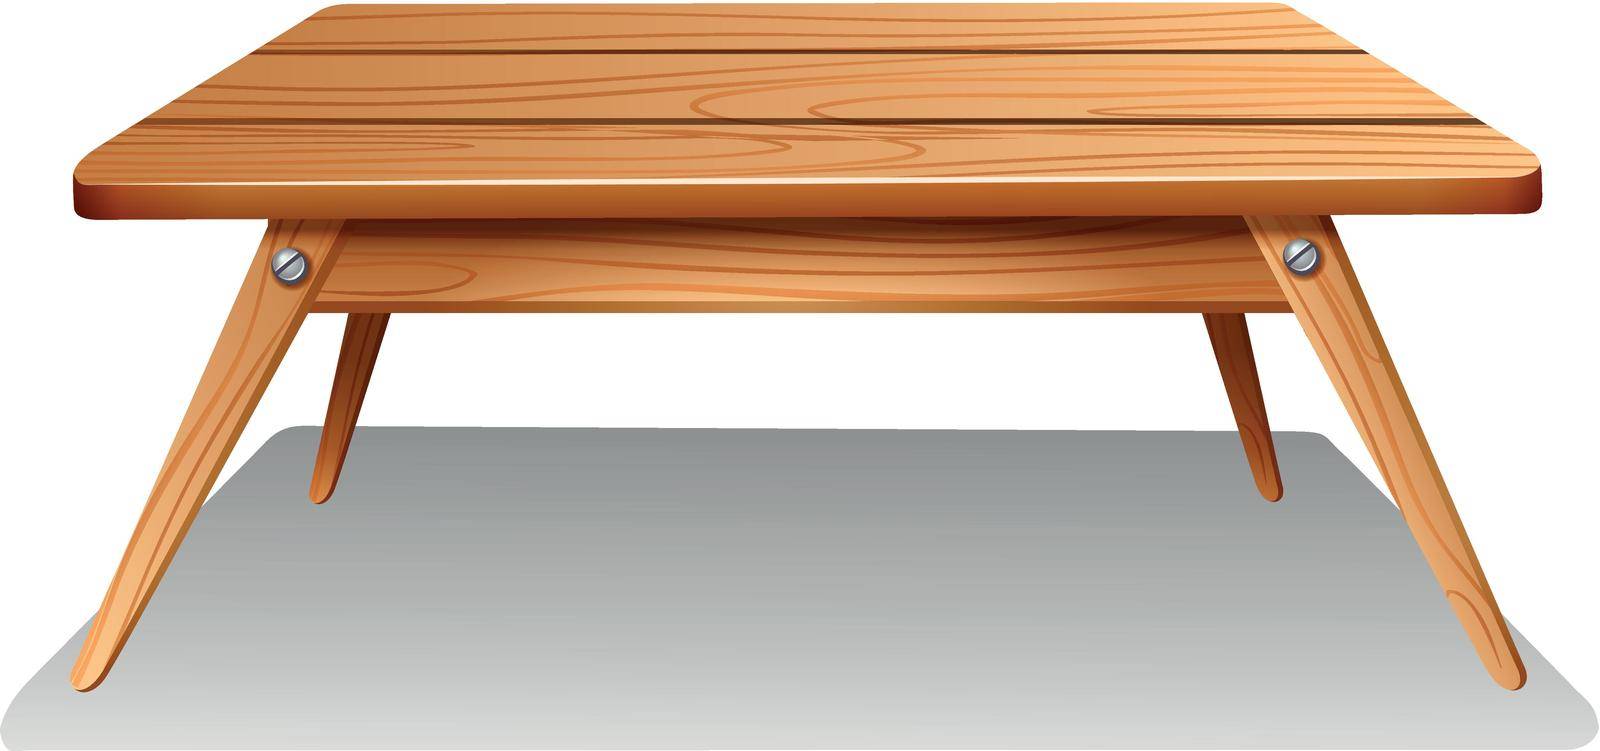 Illustration of a brown table on a white background